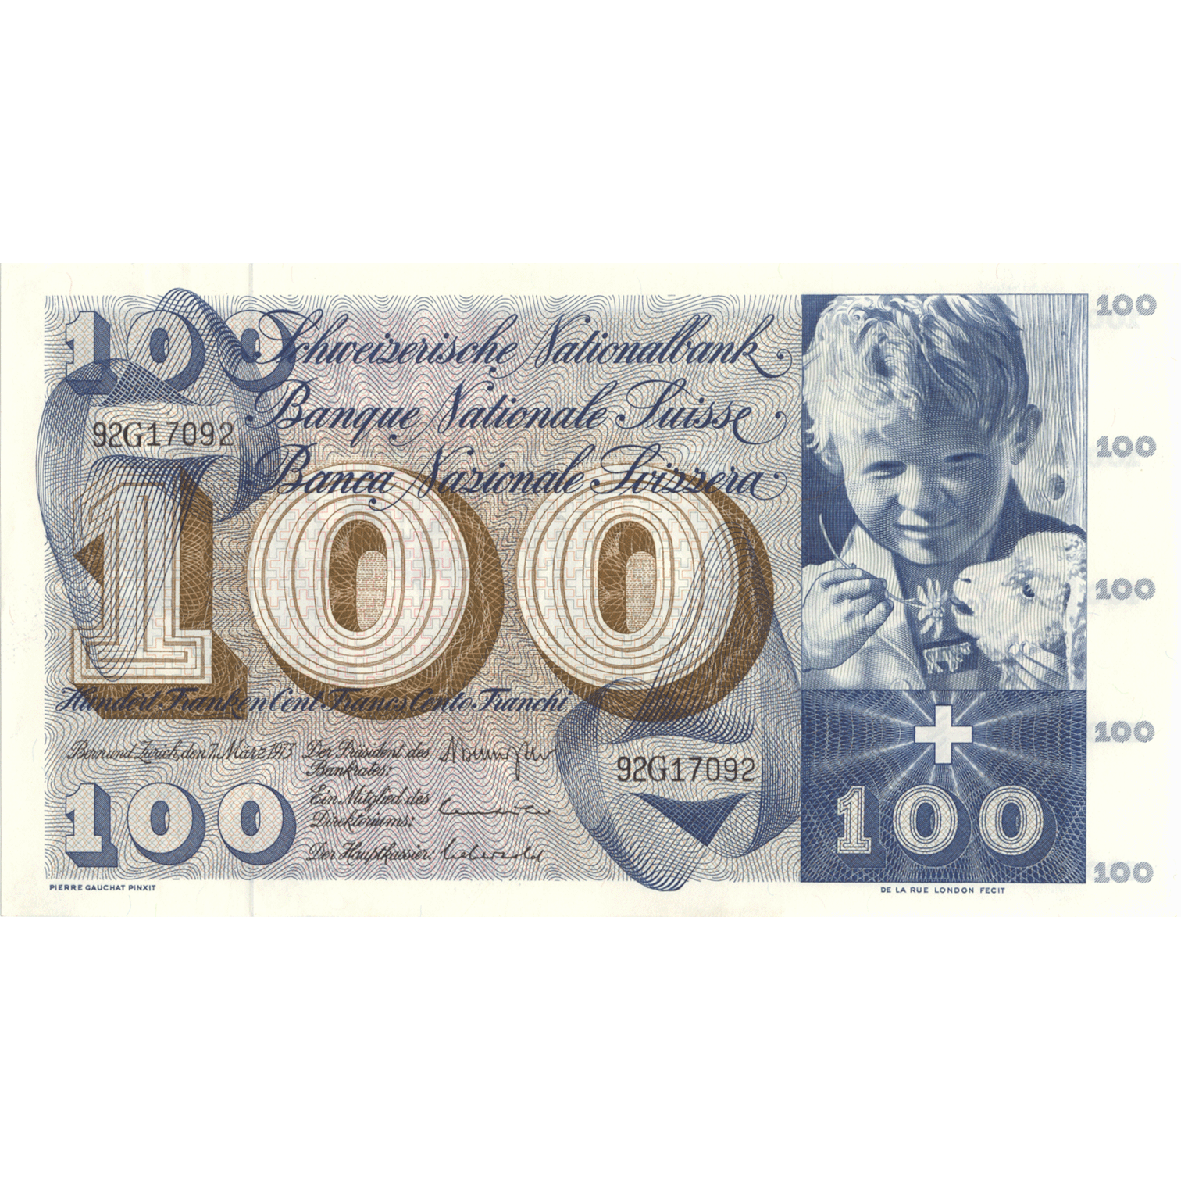 Swiss Confederation, 100 Francs (5th Banknote Series, in Circulation 1956-1980) (obverse)